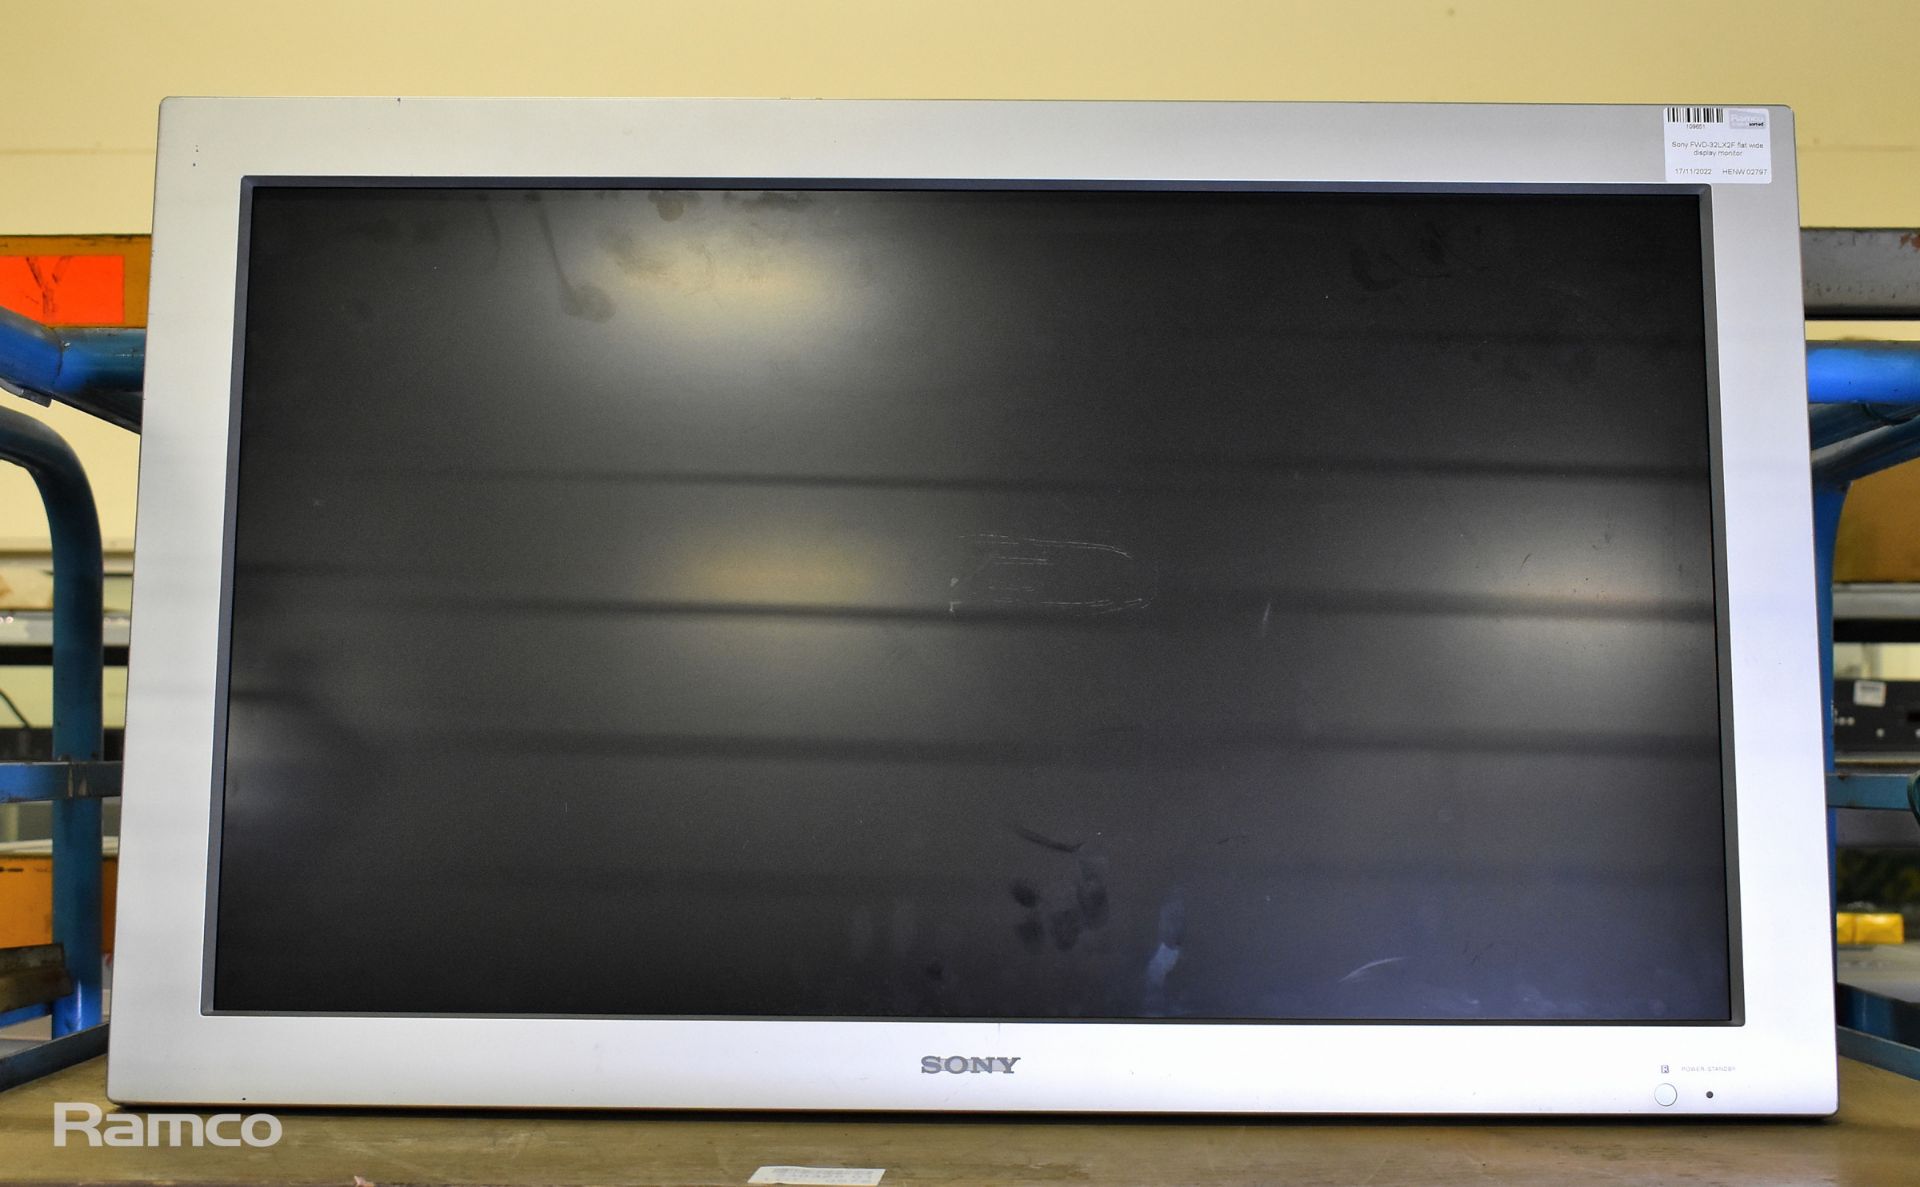 BENQ GL2250-T 22 inch monitor - slight scratches, Sony FWD-32LX2F flat wide display monitor - Image 8 of 10